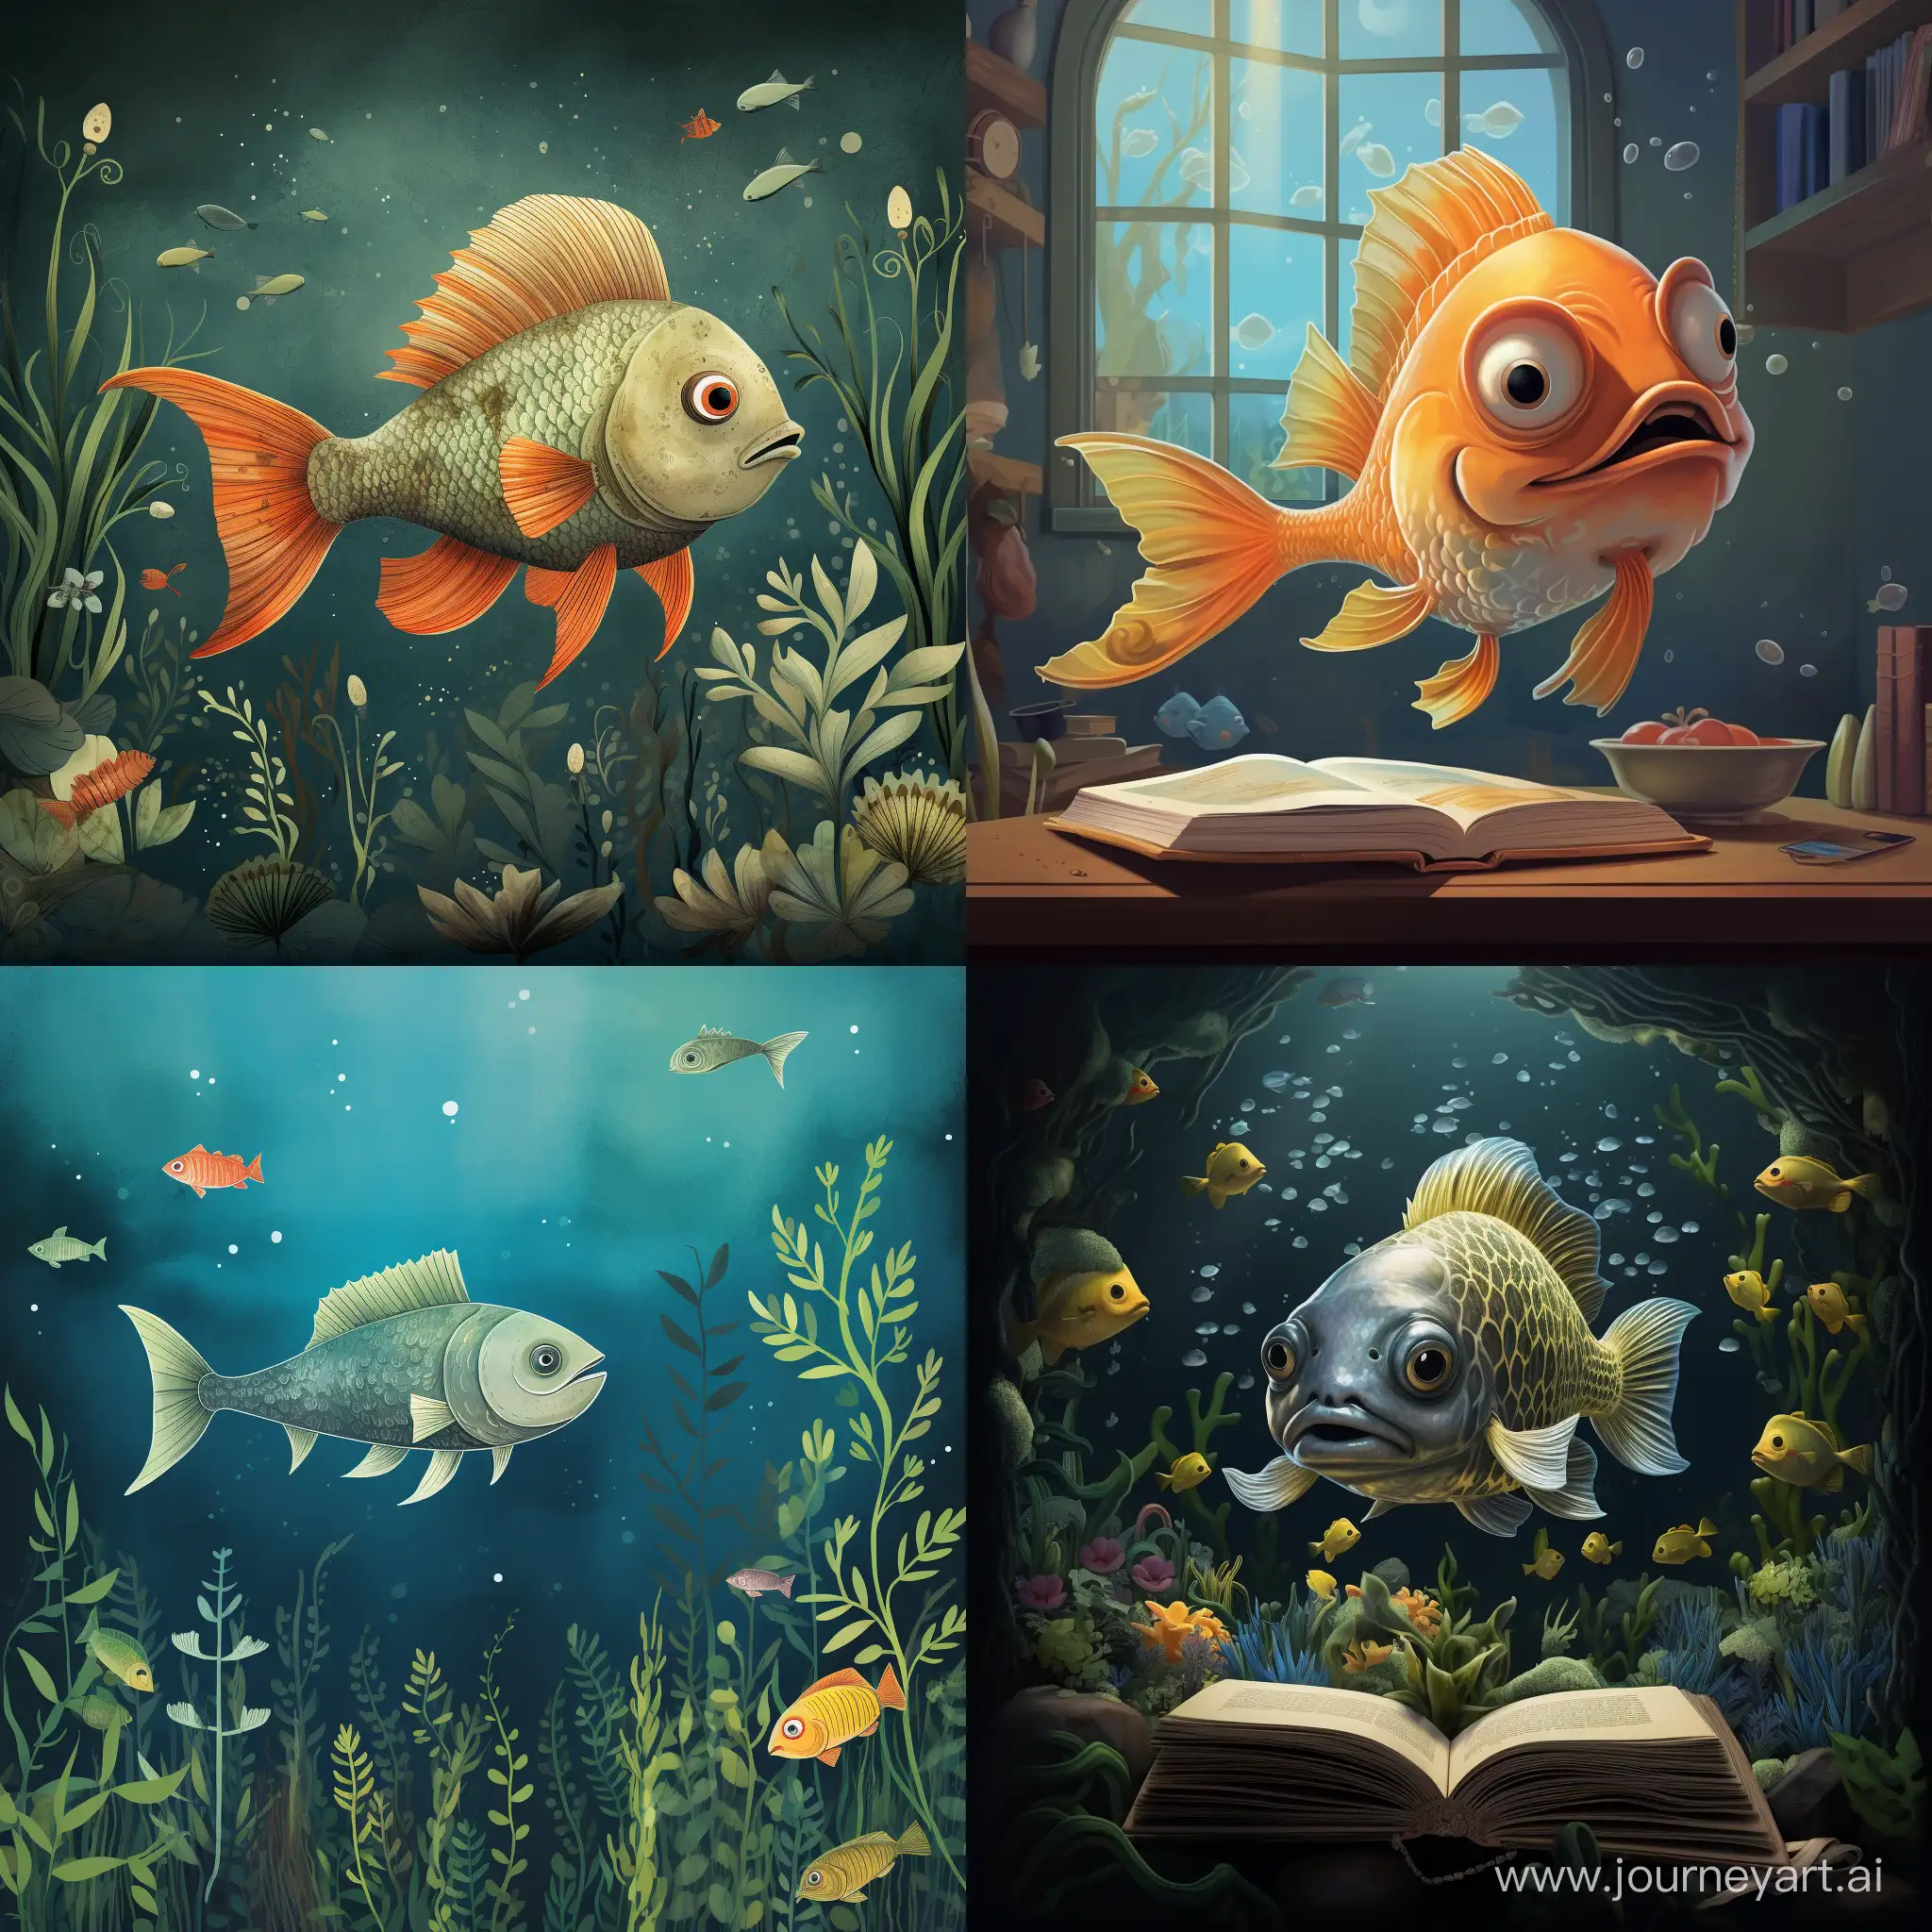 Adventurous-Childrens-Book-Illustration-Underwater-Exploration-with-a-Friendly-Fish